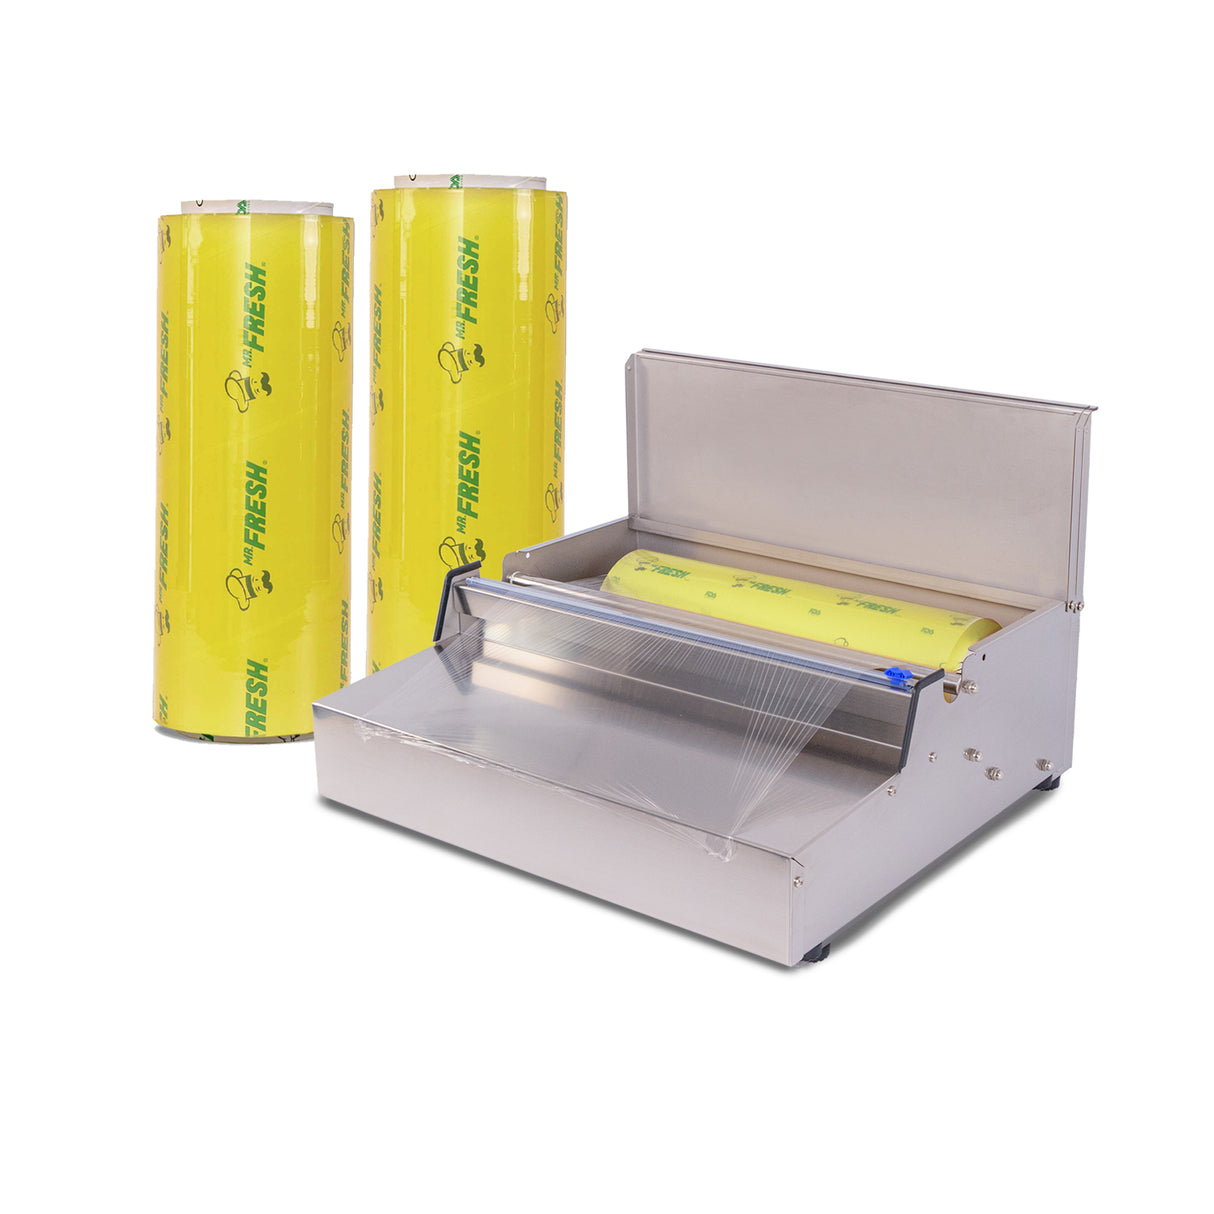 STAINLESS STEEL FOOD WRAPPER KIT WITH 2 INSTITUTIONAL 35 CM VITAFILM ROLLS OF 800 METERS.